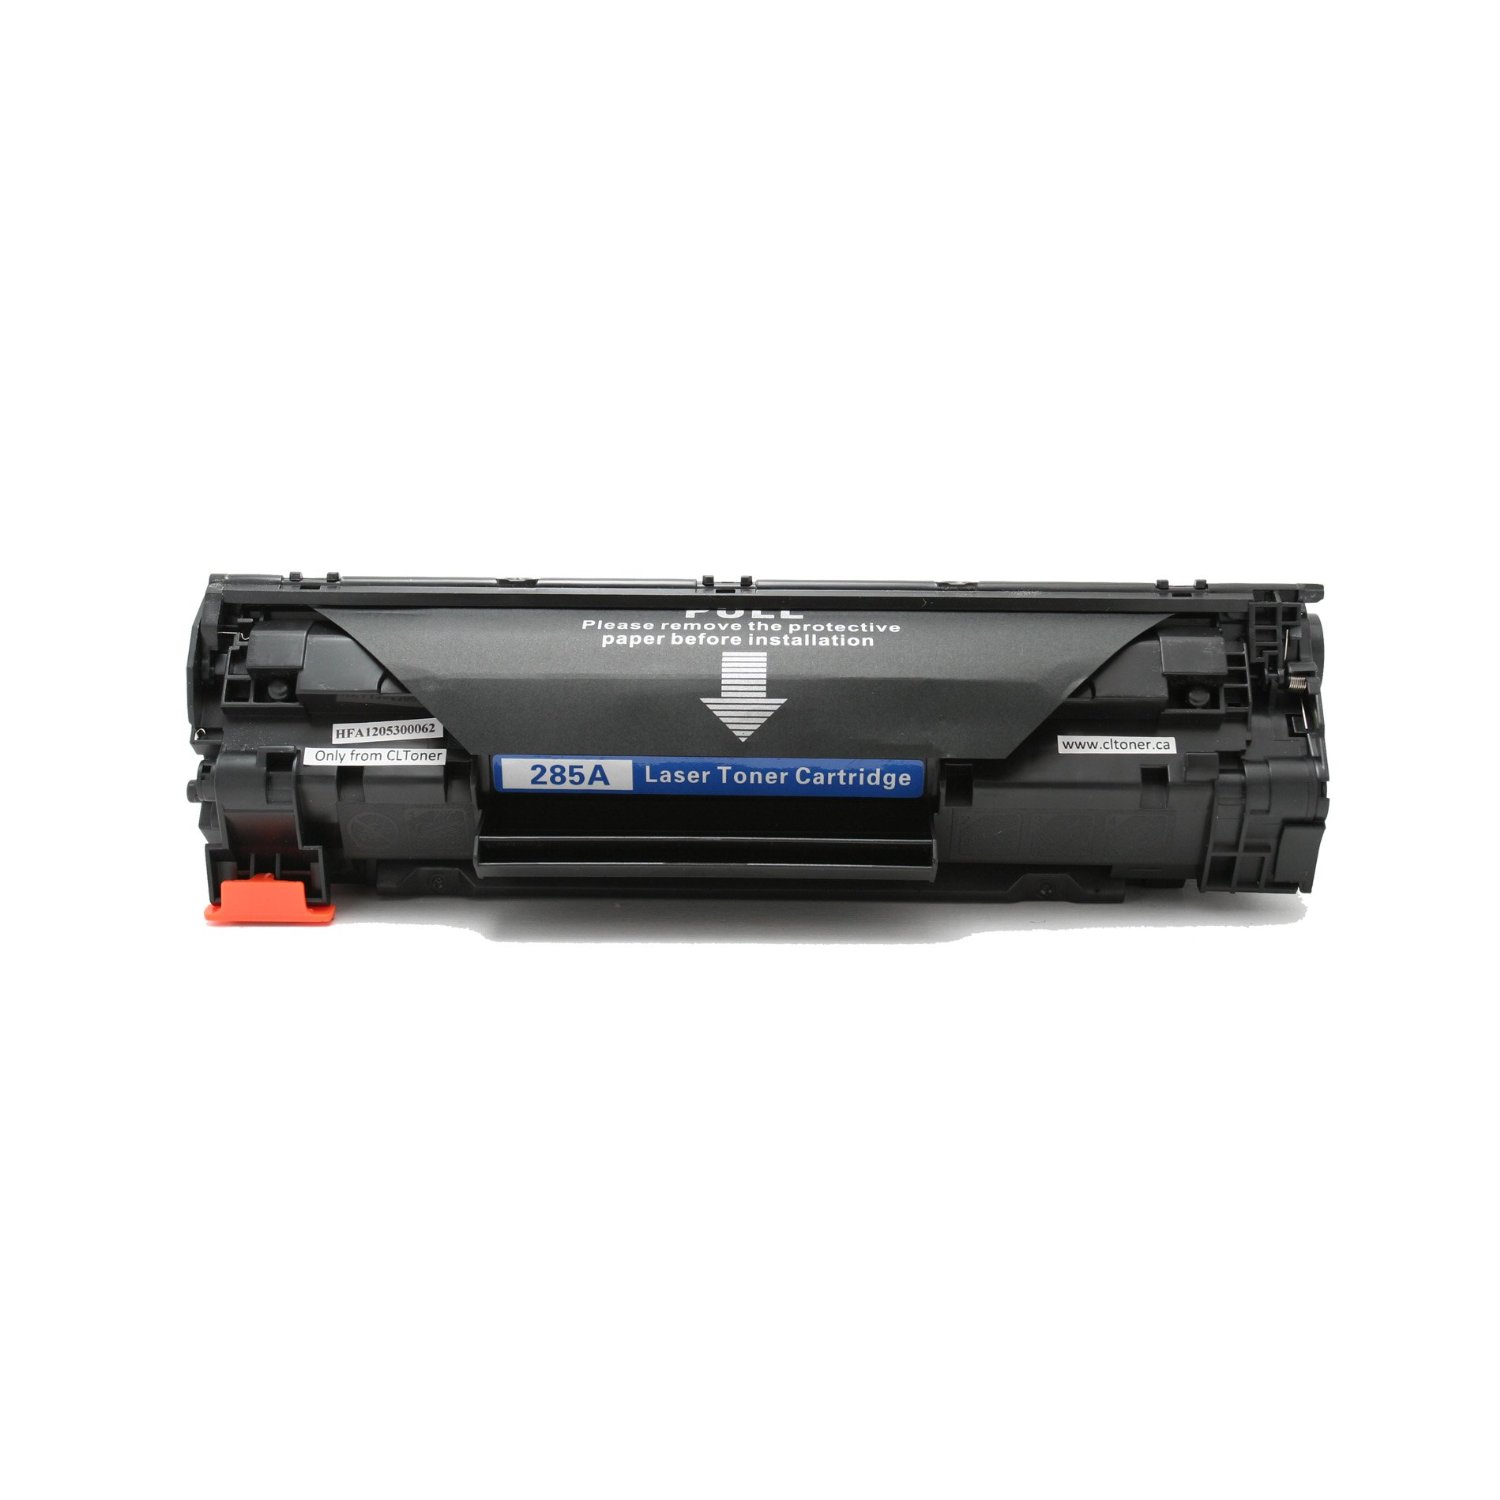 HP CE285A: New Compatible HP CE285A Toner Cartridge for HP LaserJet Pro P1100 P1102 P1102w P1415nw